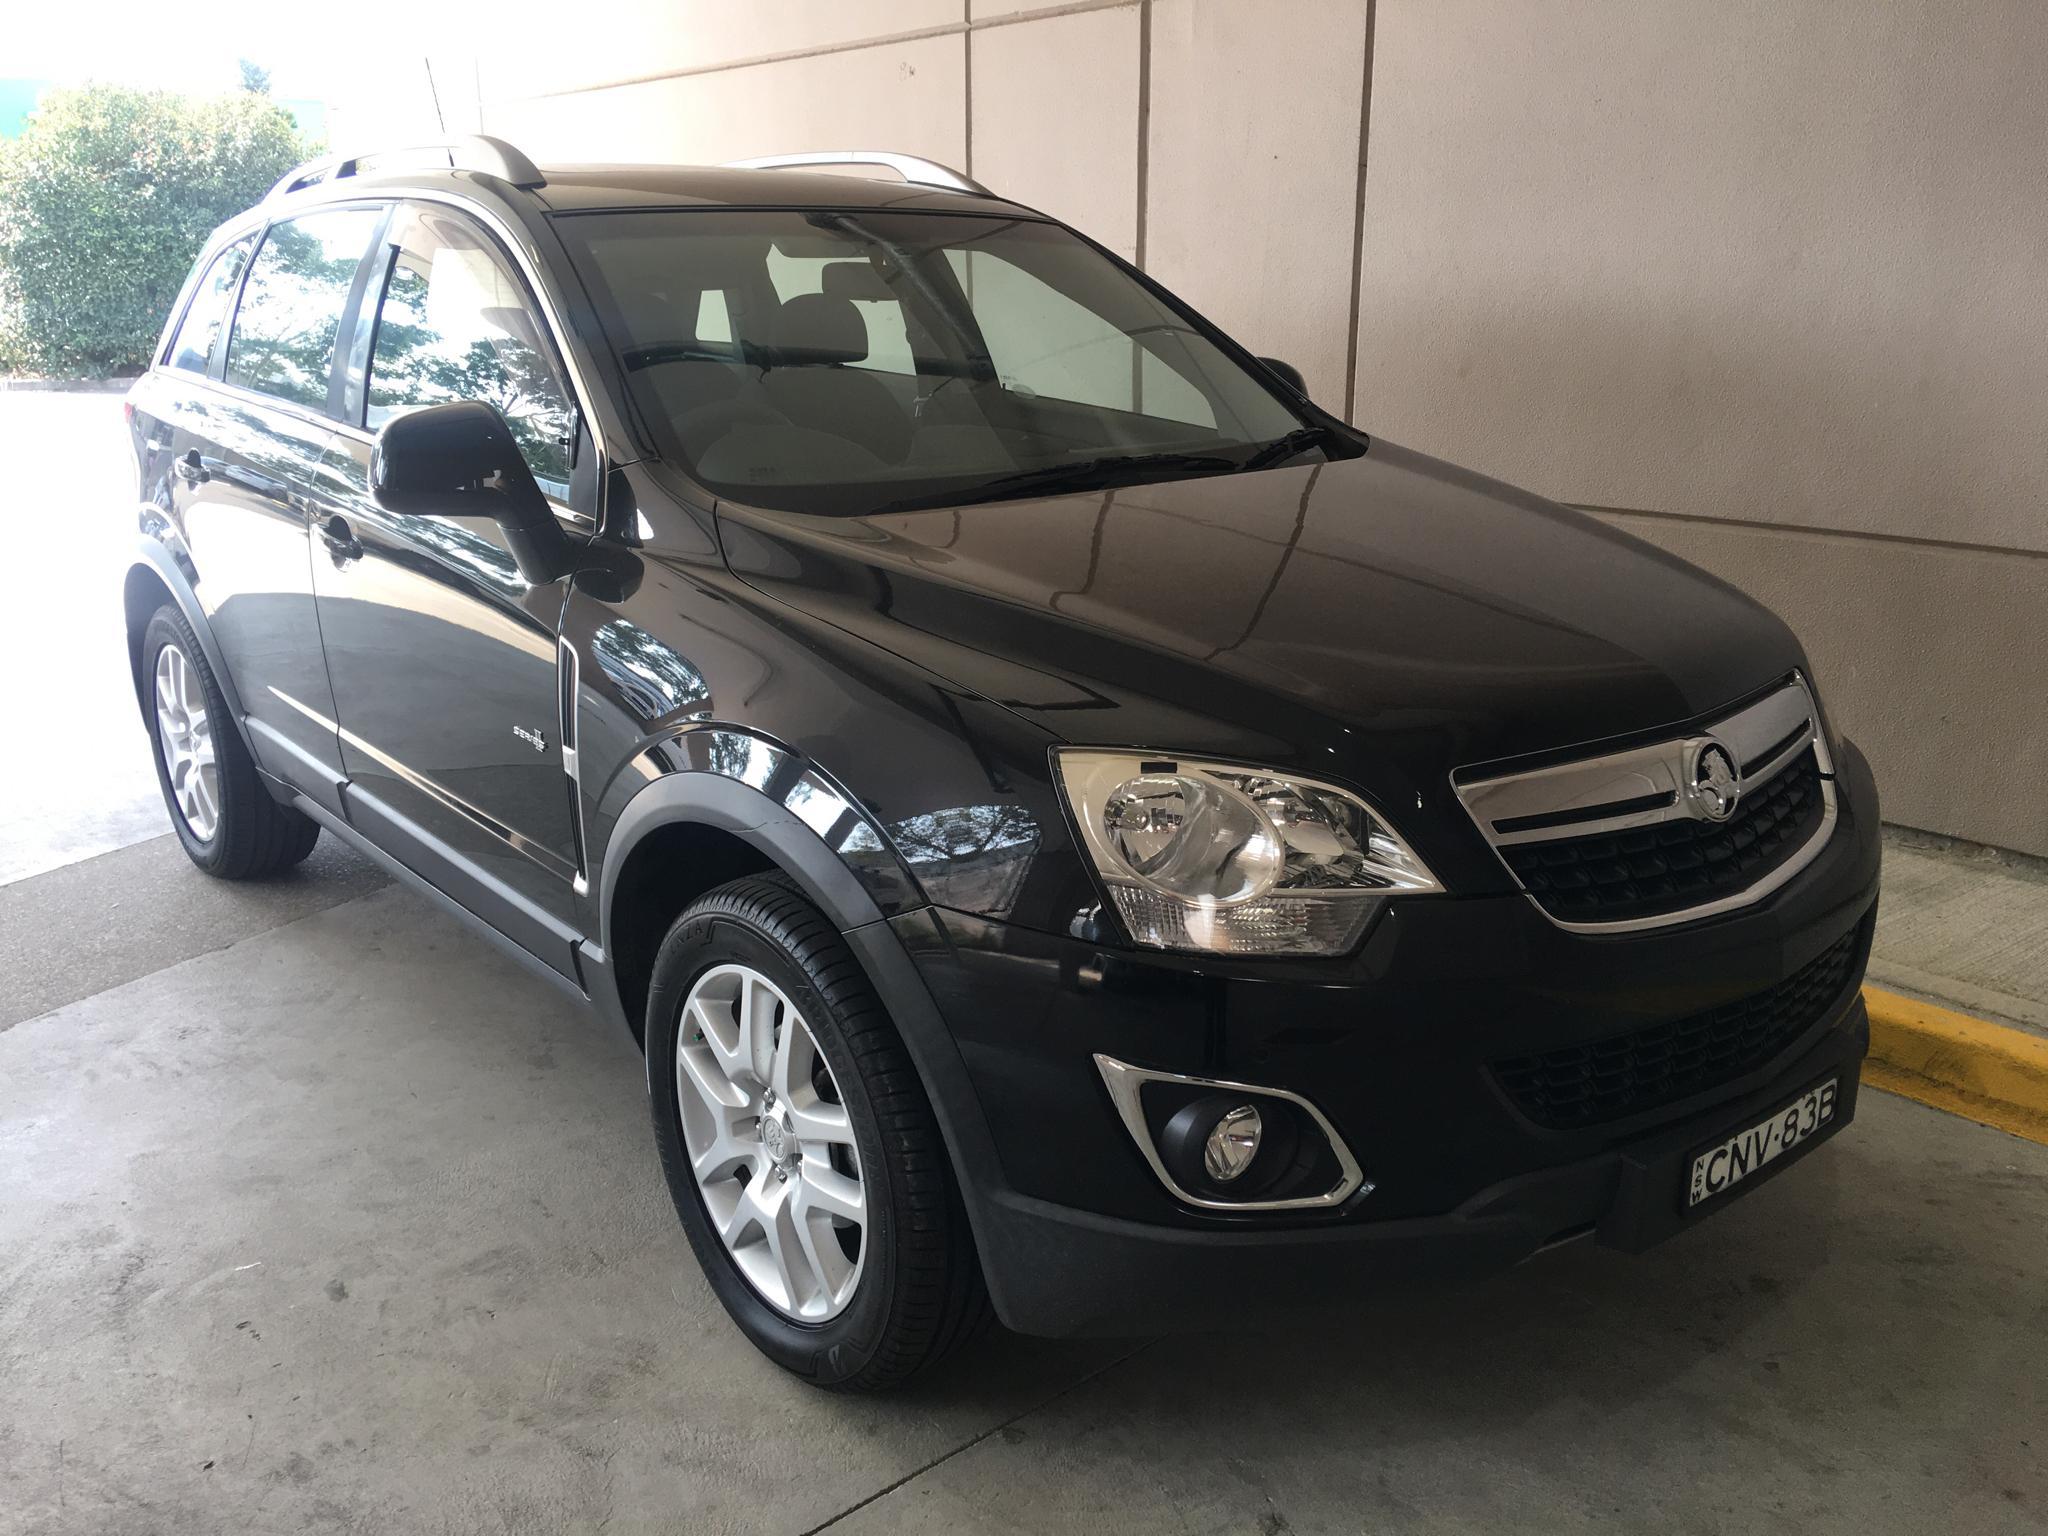 2013 Holden Captiva CG 5 Wagon 4dr Spts Auto 6sp 2.4i (FWD) Picture 8